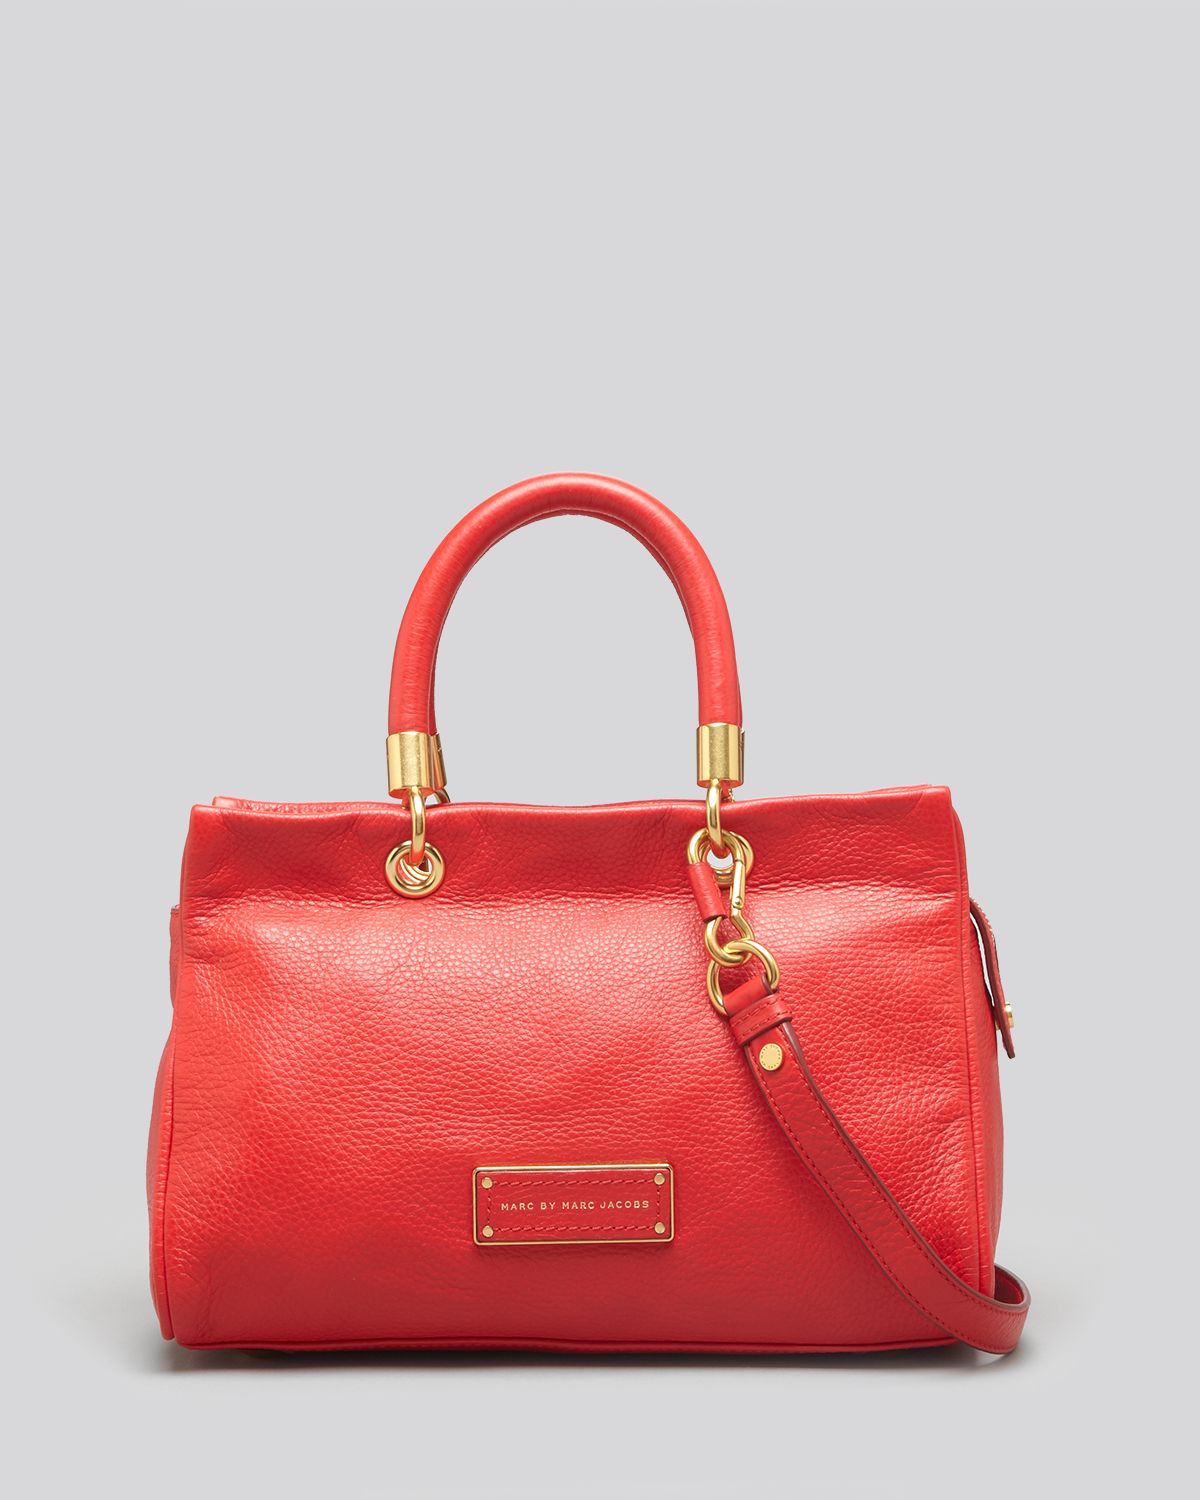 Lyst - Marc By Marc Jacobs Satchel - Too Hot To Handle in Red